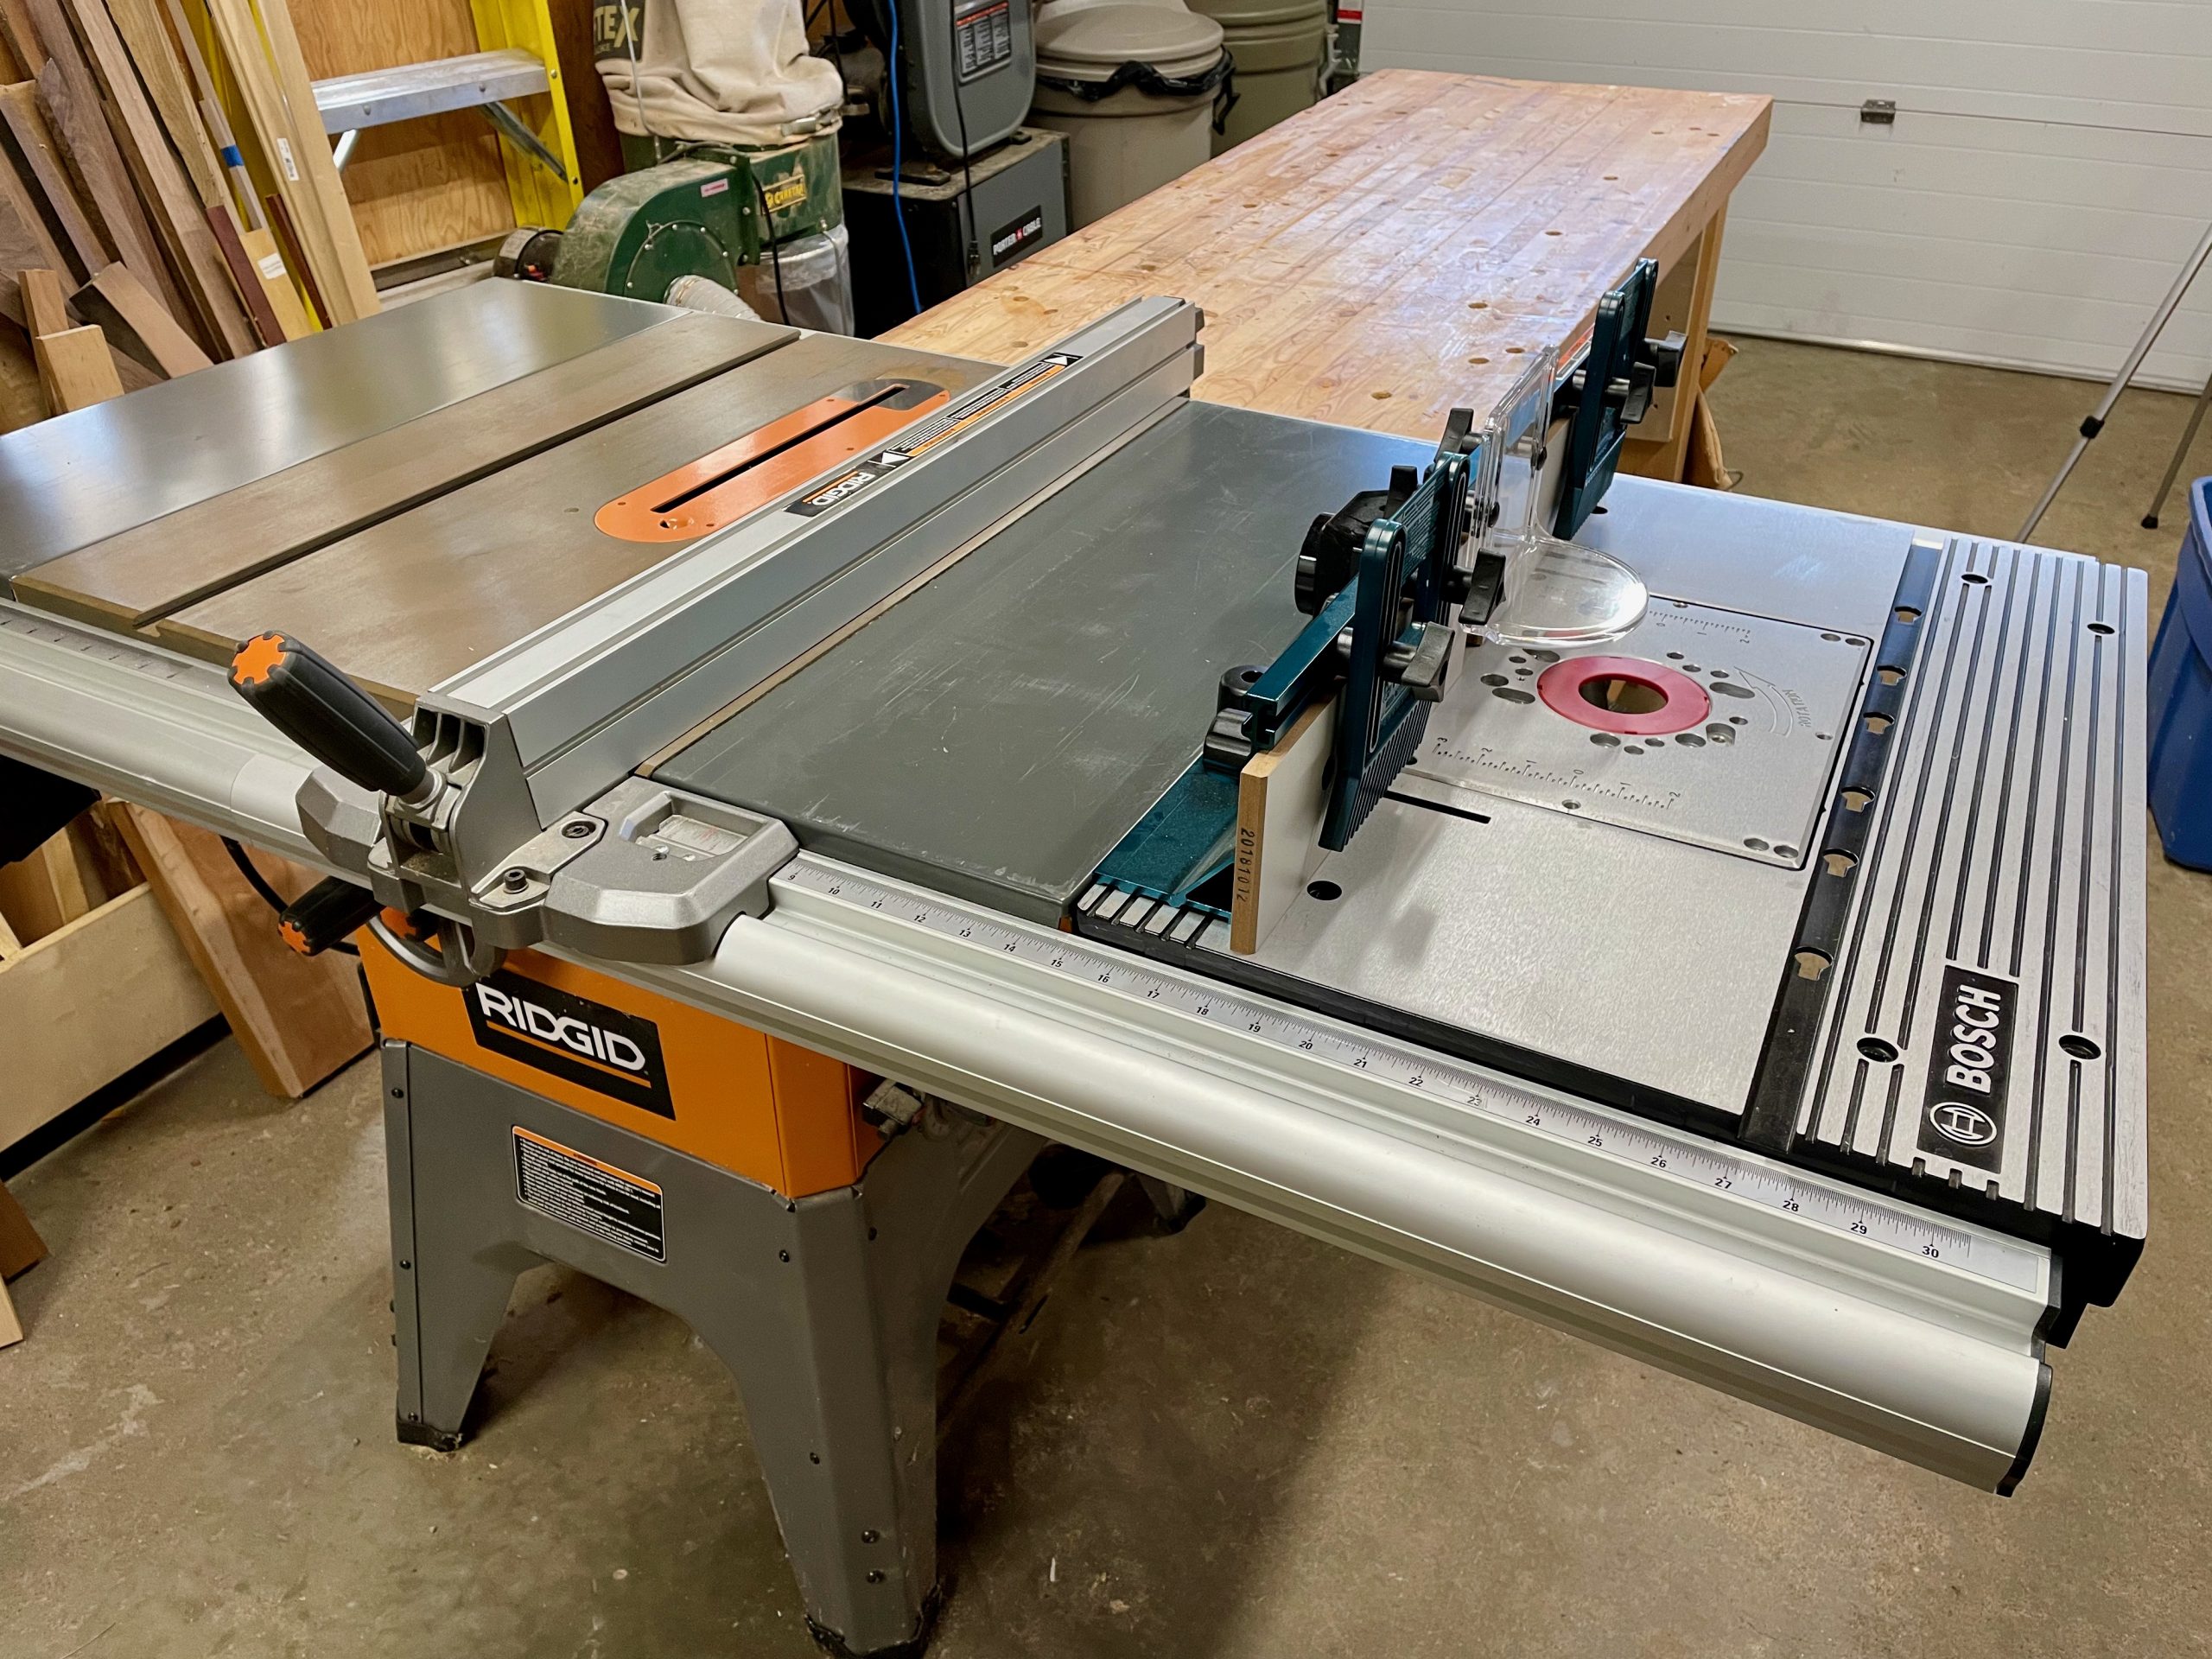 Ridgid Table Saw Assembly Instructions